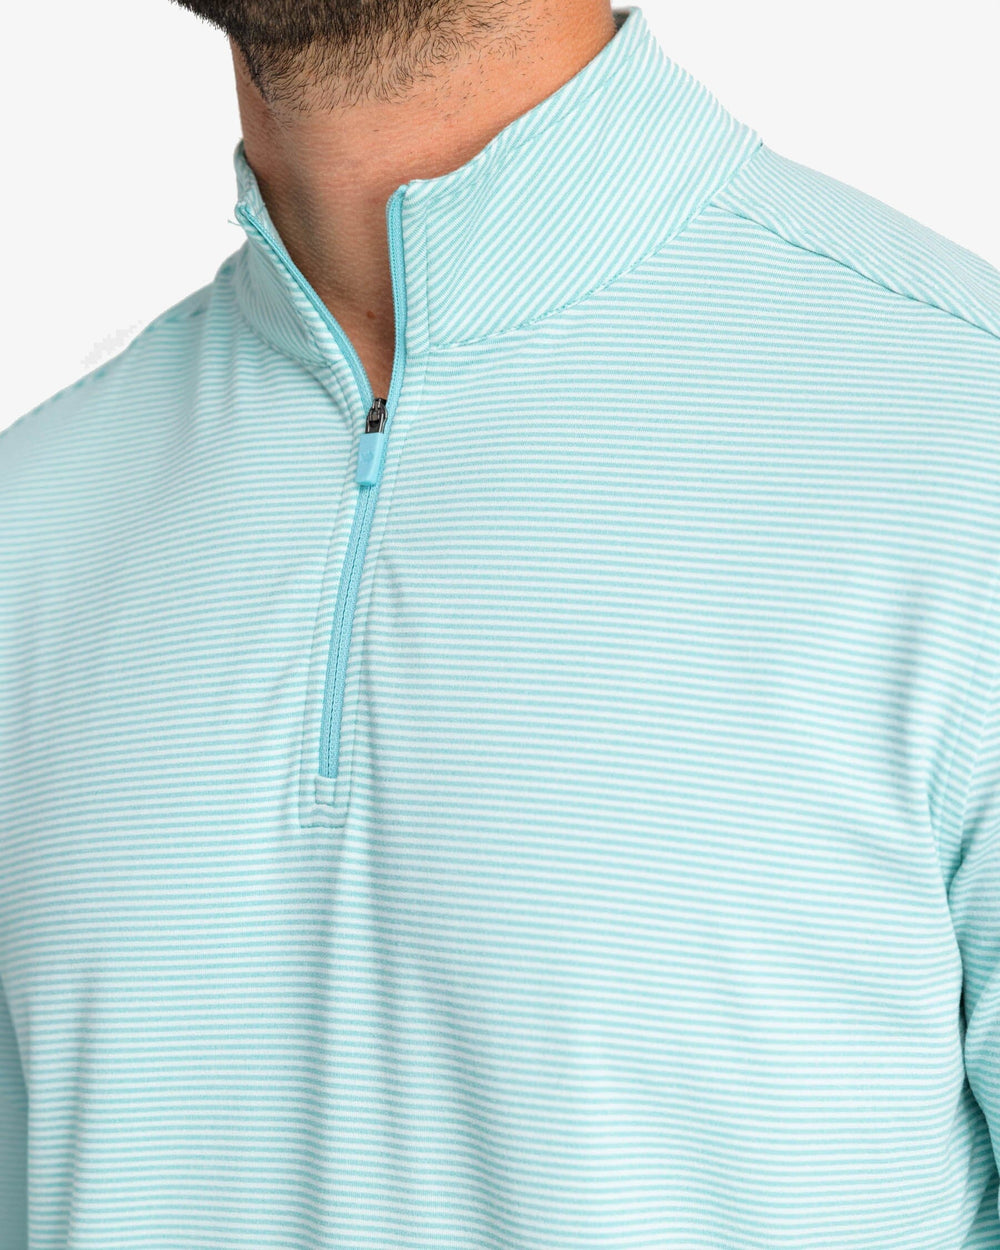 The detail view of the Southern Tide Cruiser Heather Micro-Stripe Performance Quarter Zip by Southern Tide - Heather Tidal Wave